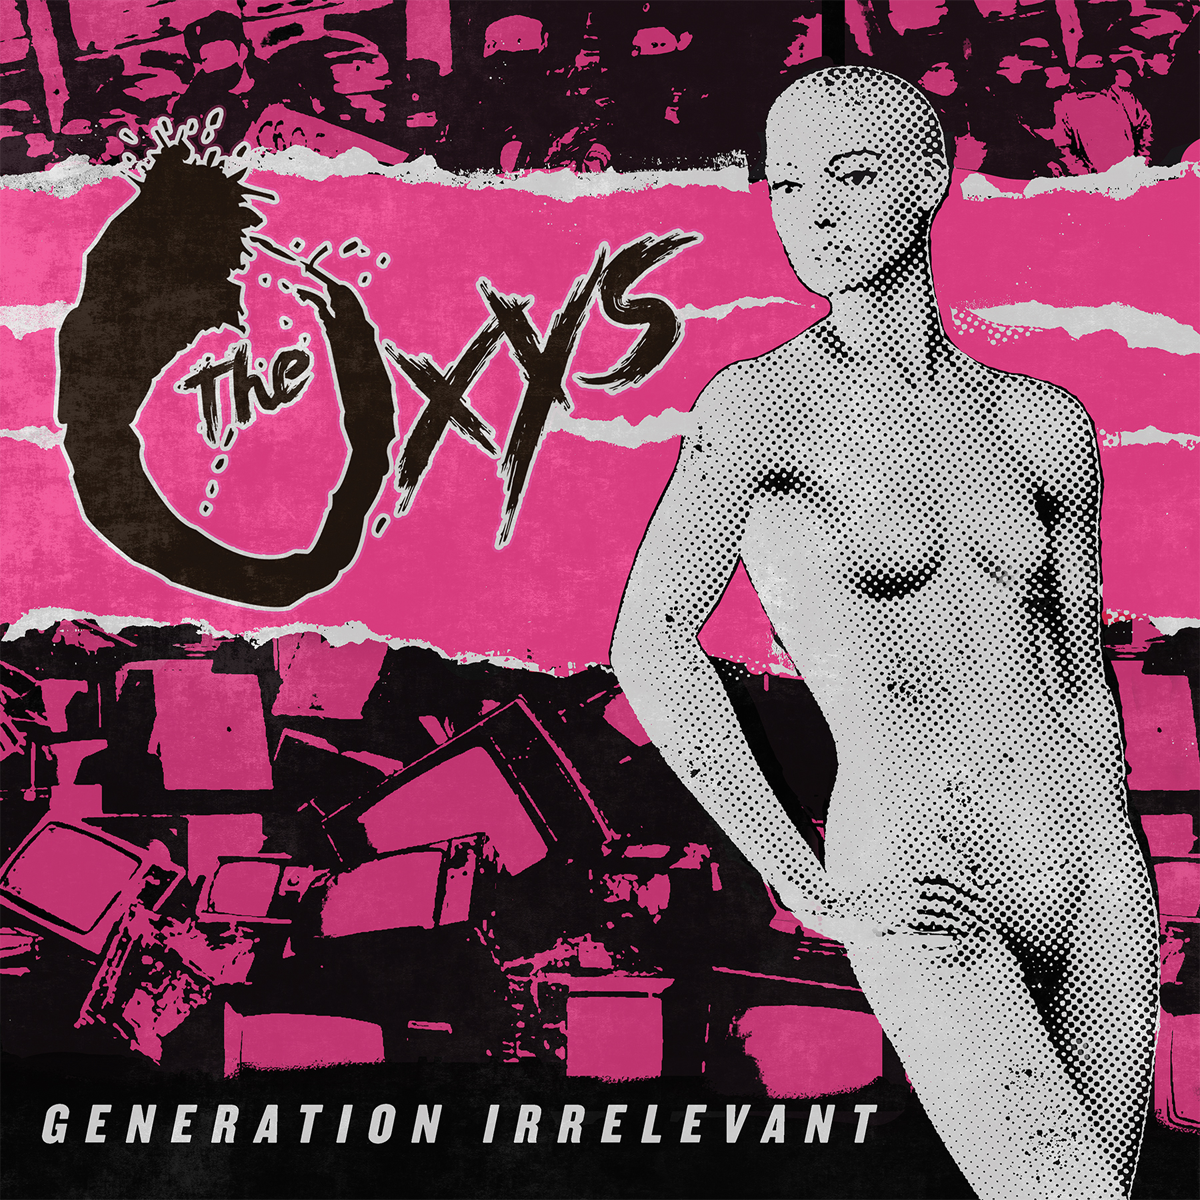 The Oxys- Generation Irrelevant LP ~SPECIAL EDITION : HALF TRANSPARENT PINK / HALF OPAQUE PINK SPLIT COLORED VINYL LIMITED TO 100!